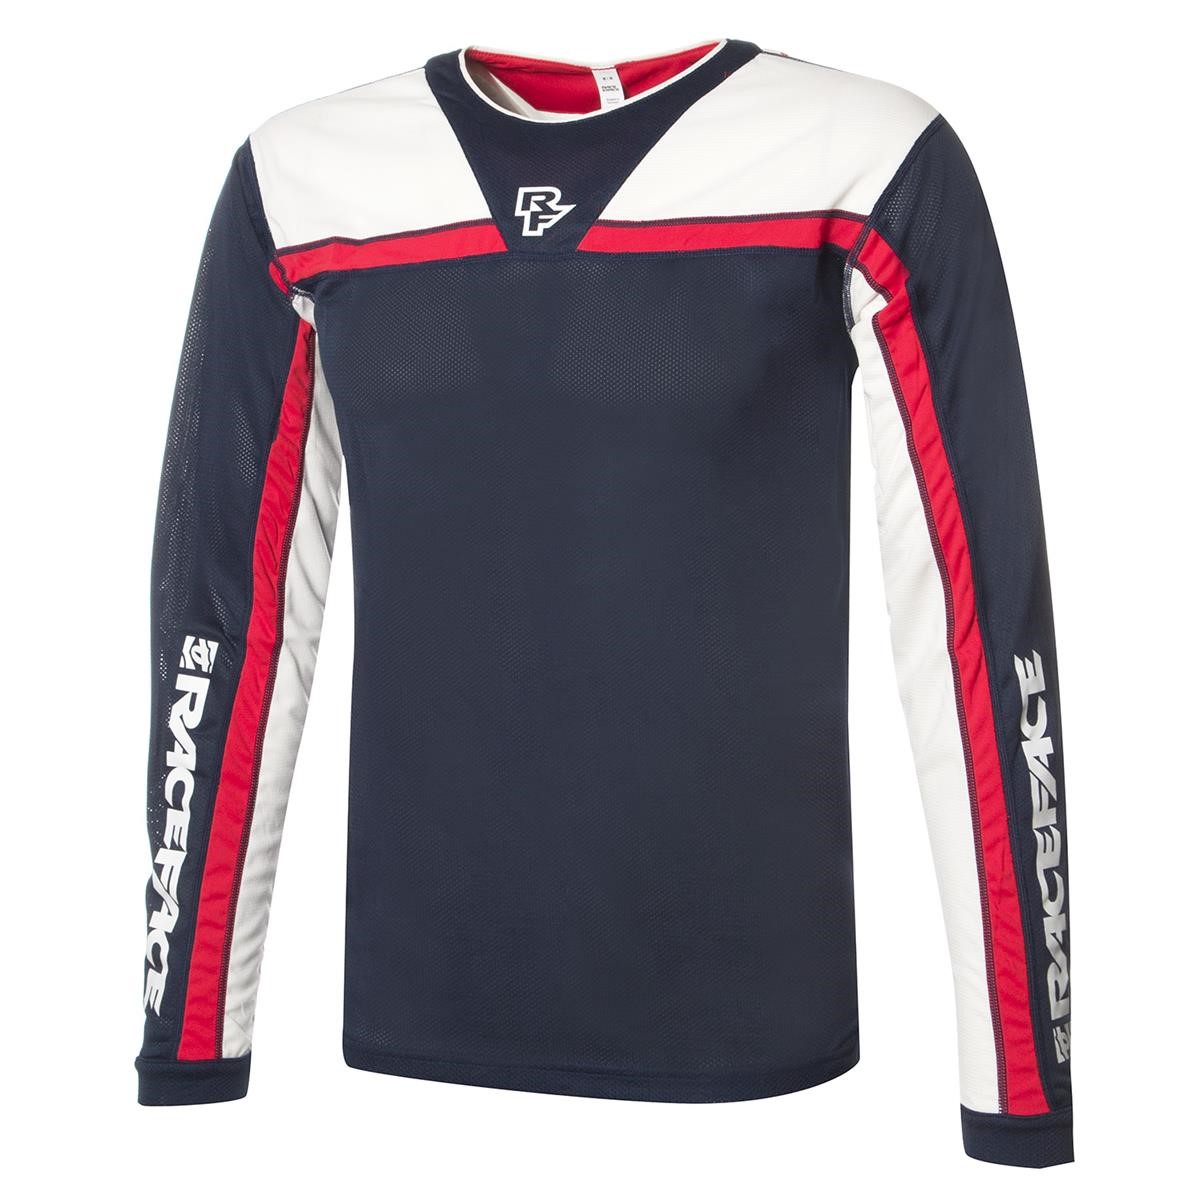 Race Face Maillot VTT Manches Longues Stage Navy/Flame